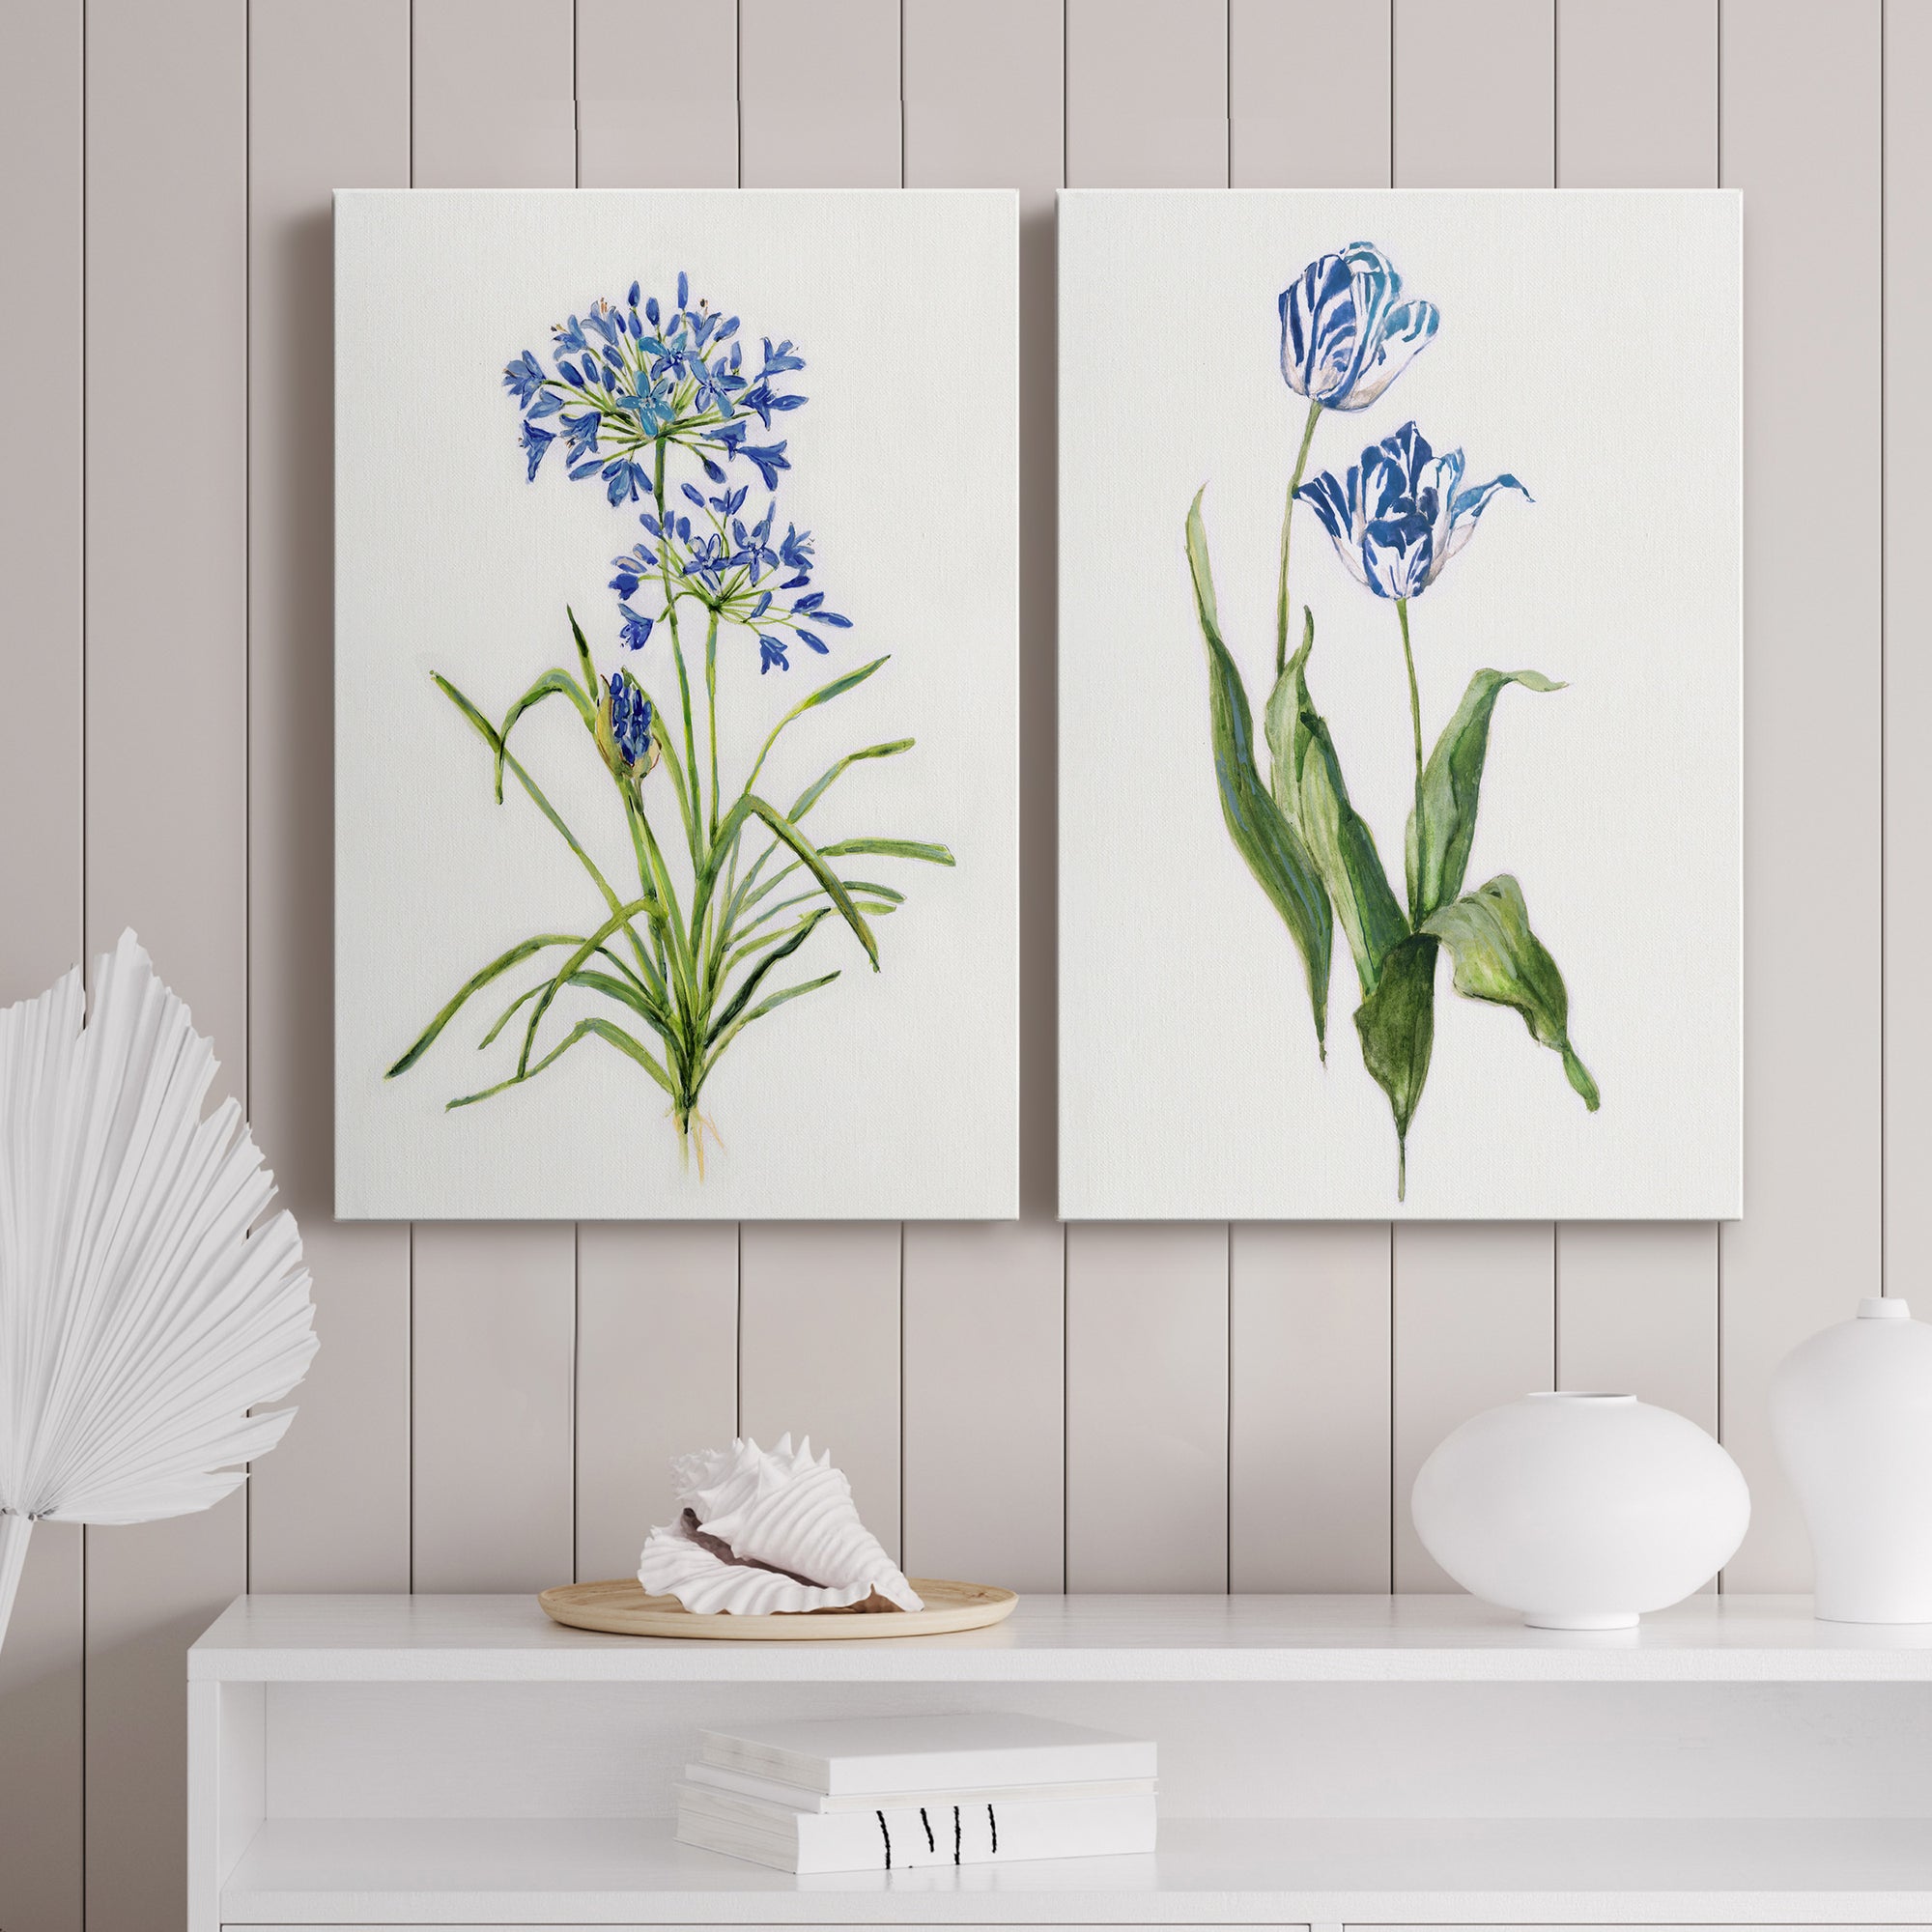 Blue Lively Botanical I Premium Gallery Wrapped Canvas - Ready to Hang - Set of 2 - 8 x 12 Each